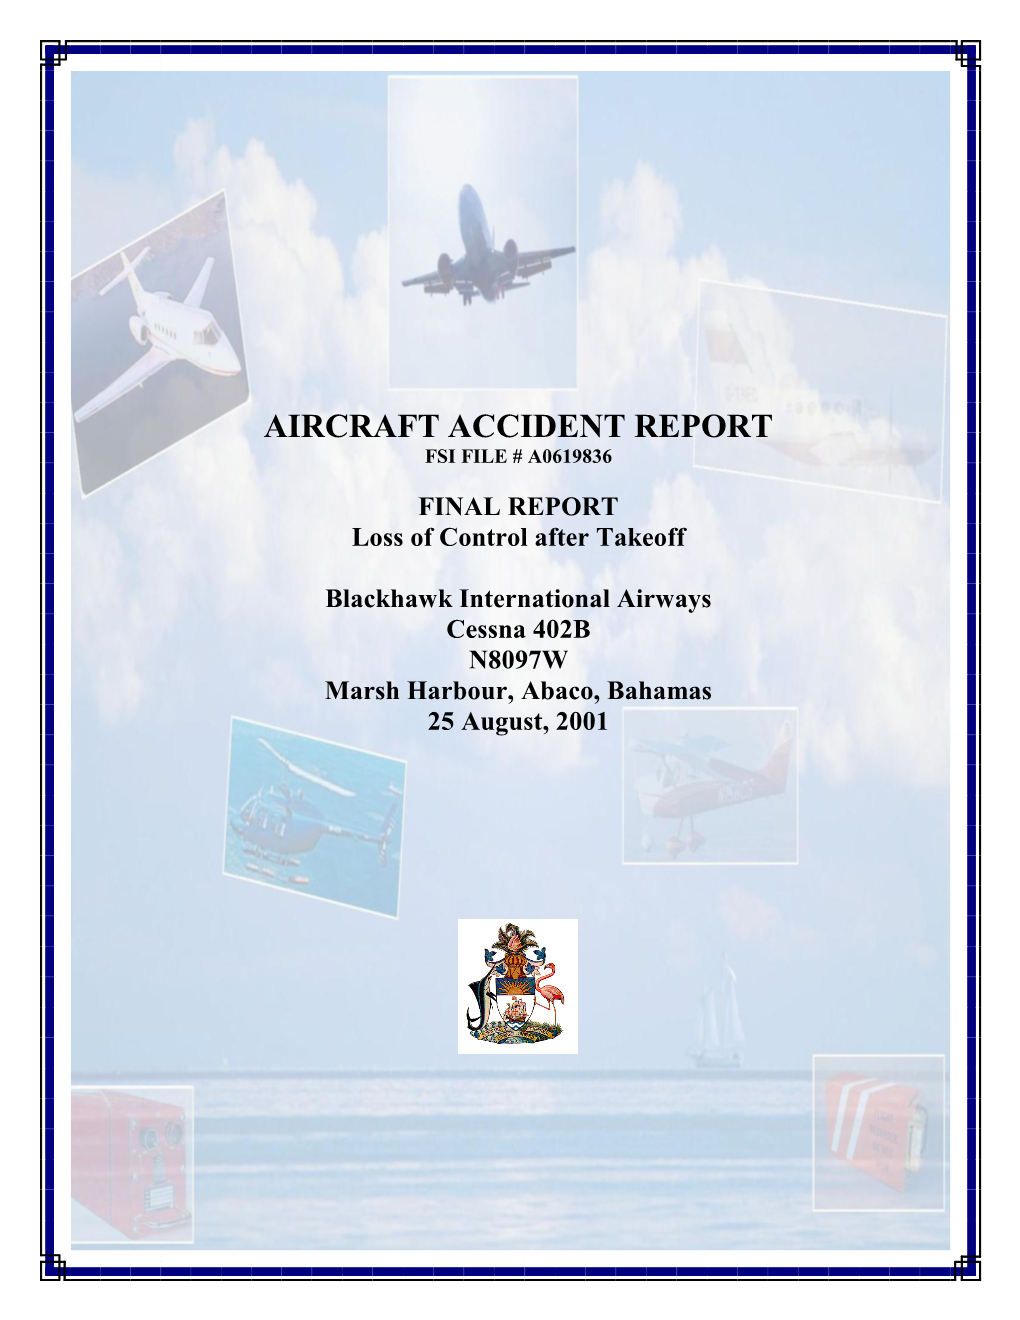 Final Accident Report